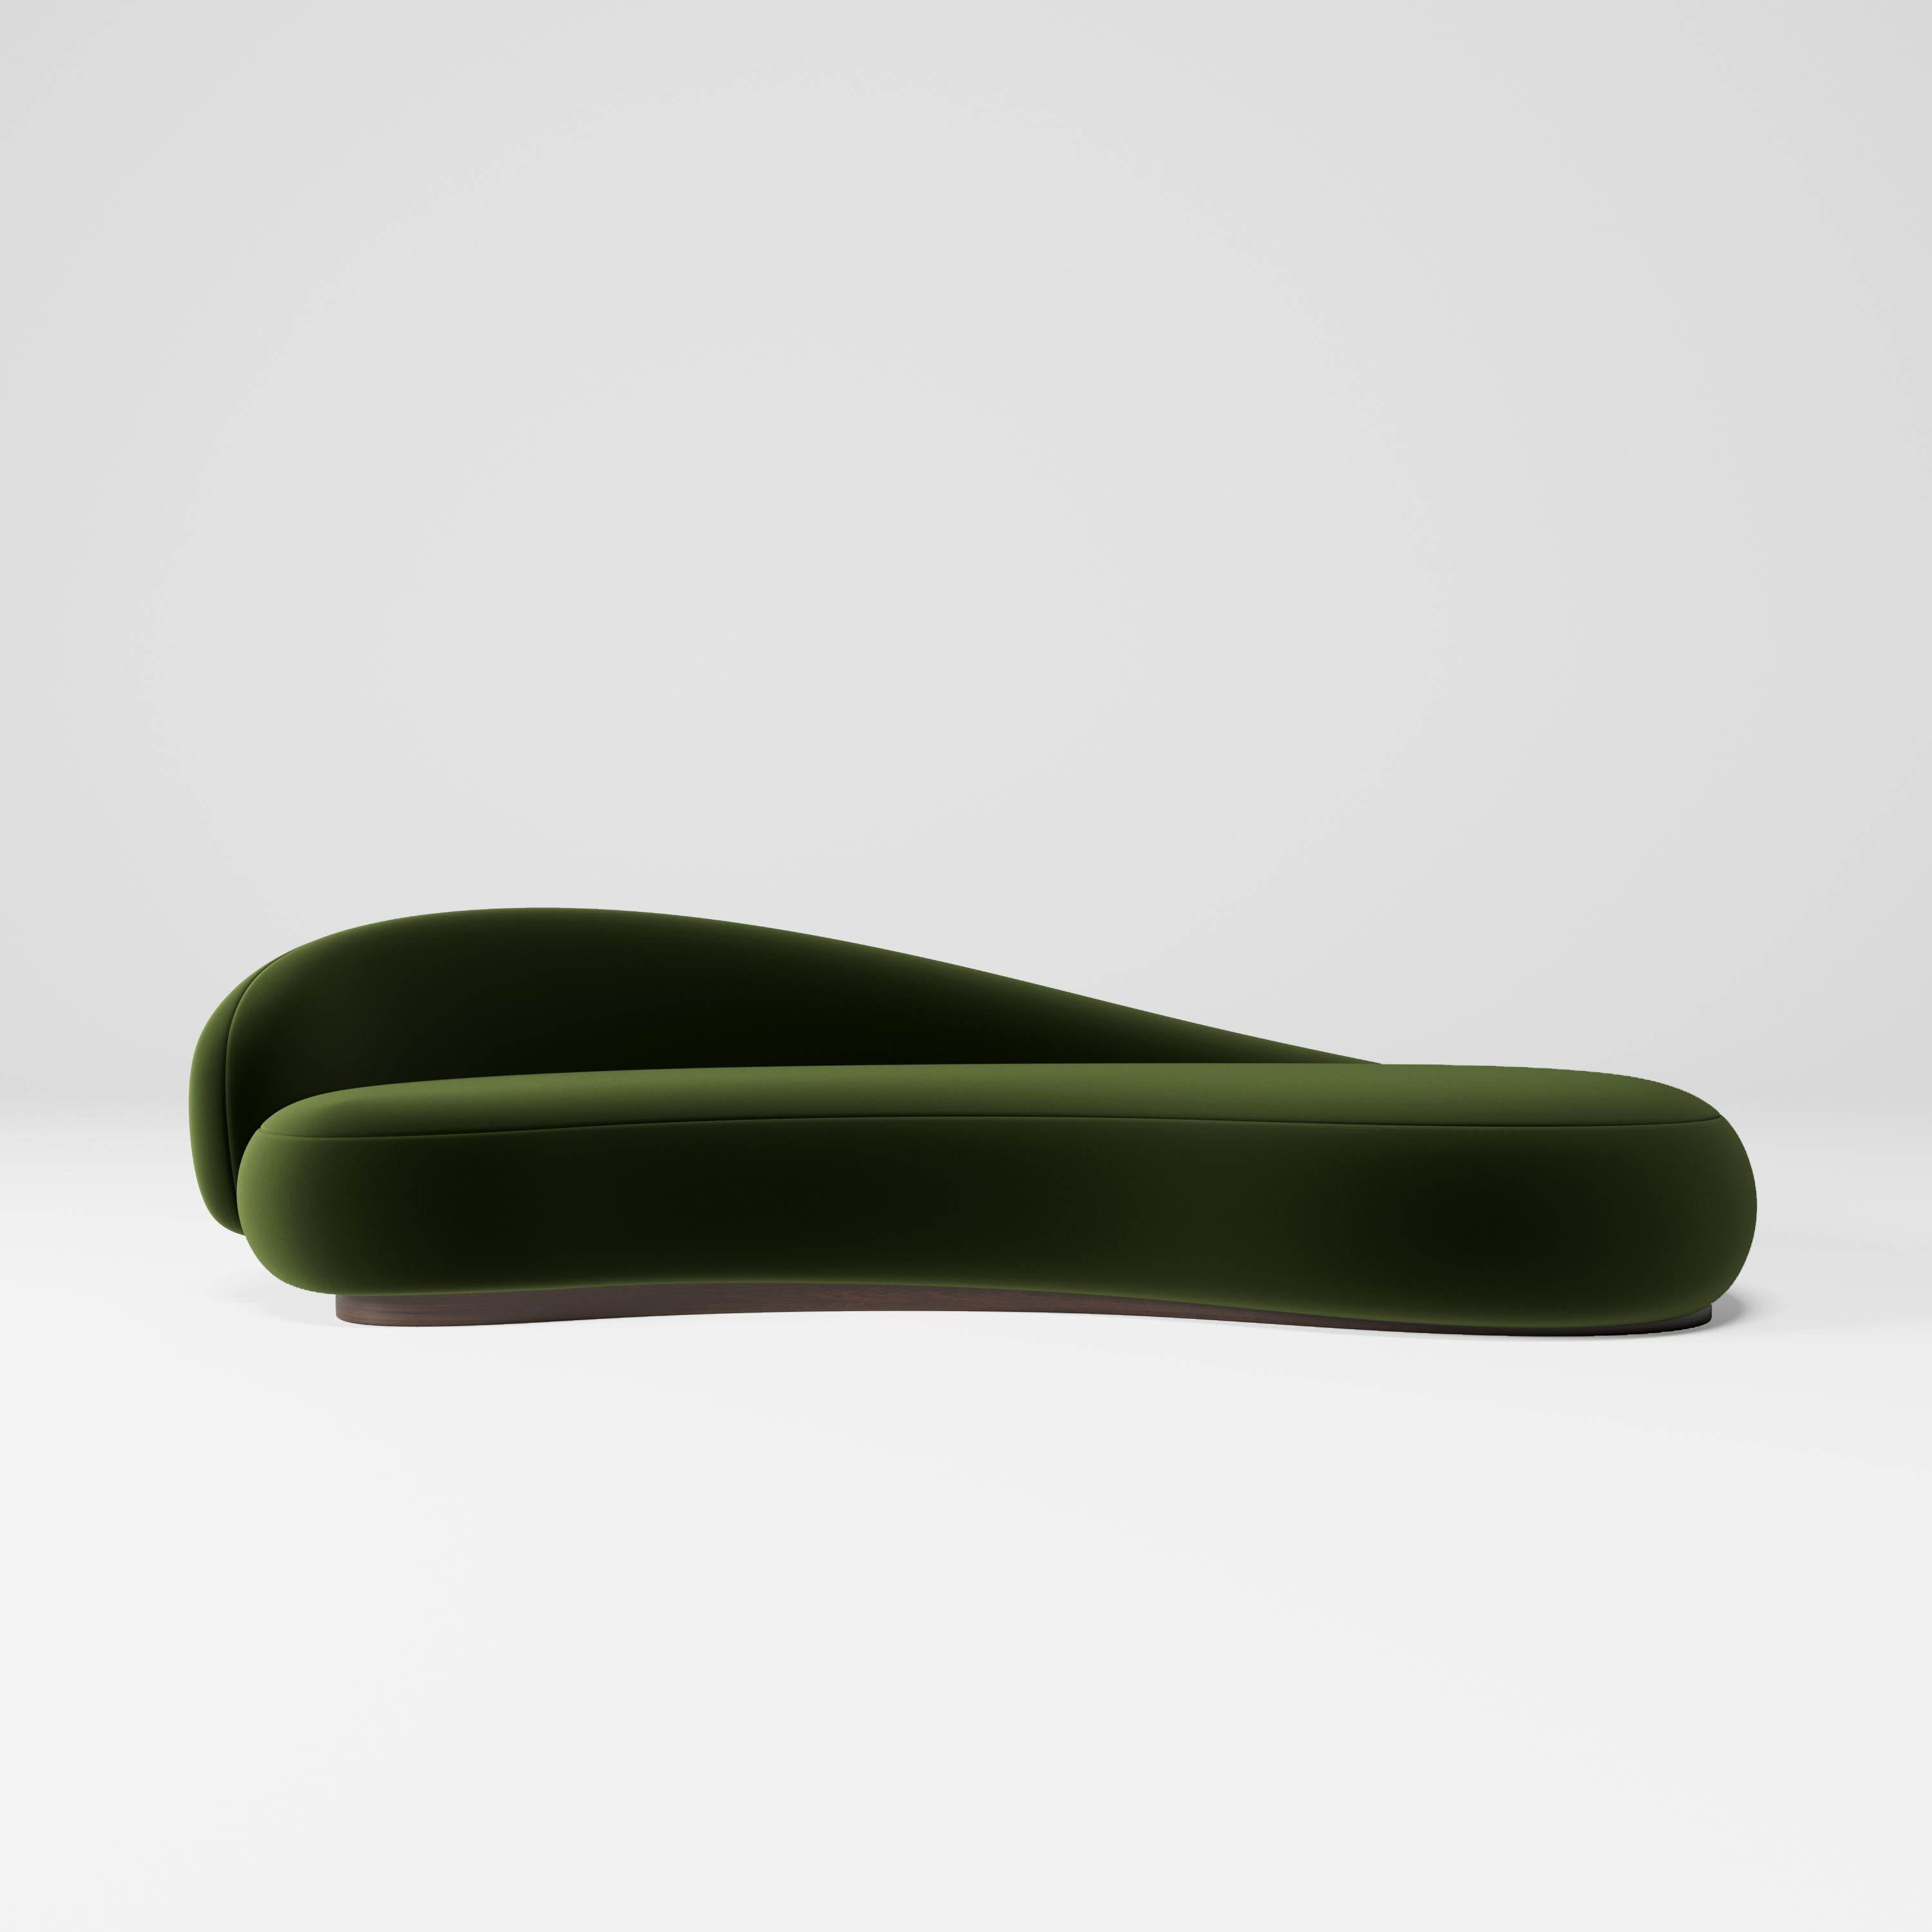 Material information:

Lupa Sofa, which has a flexible velvet fabric that integrates with its organic and curved structure, does not have any lumps or defects in its details. In addition, it provides a long-lasting use with its easy-to-clean fabric